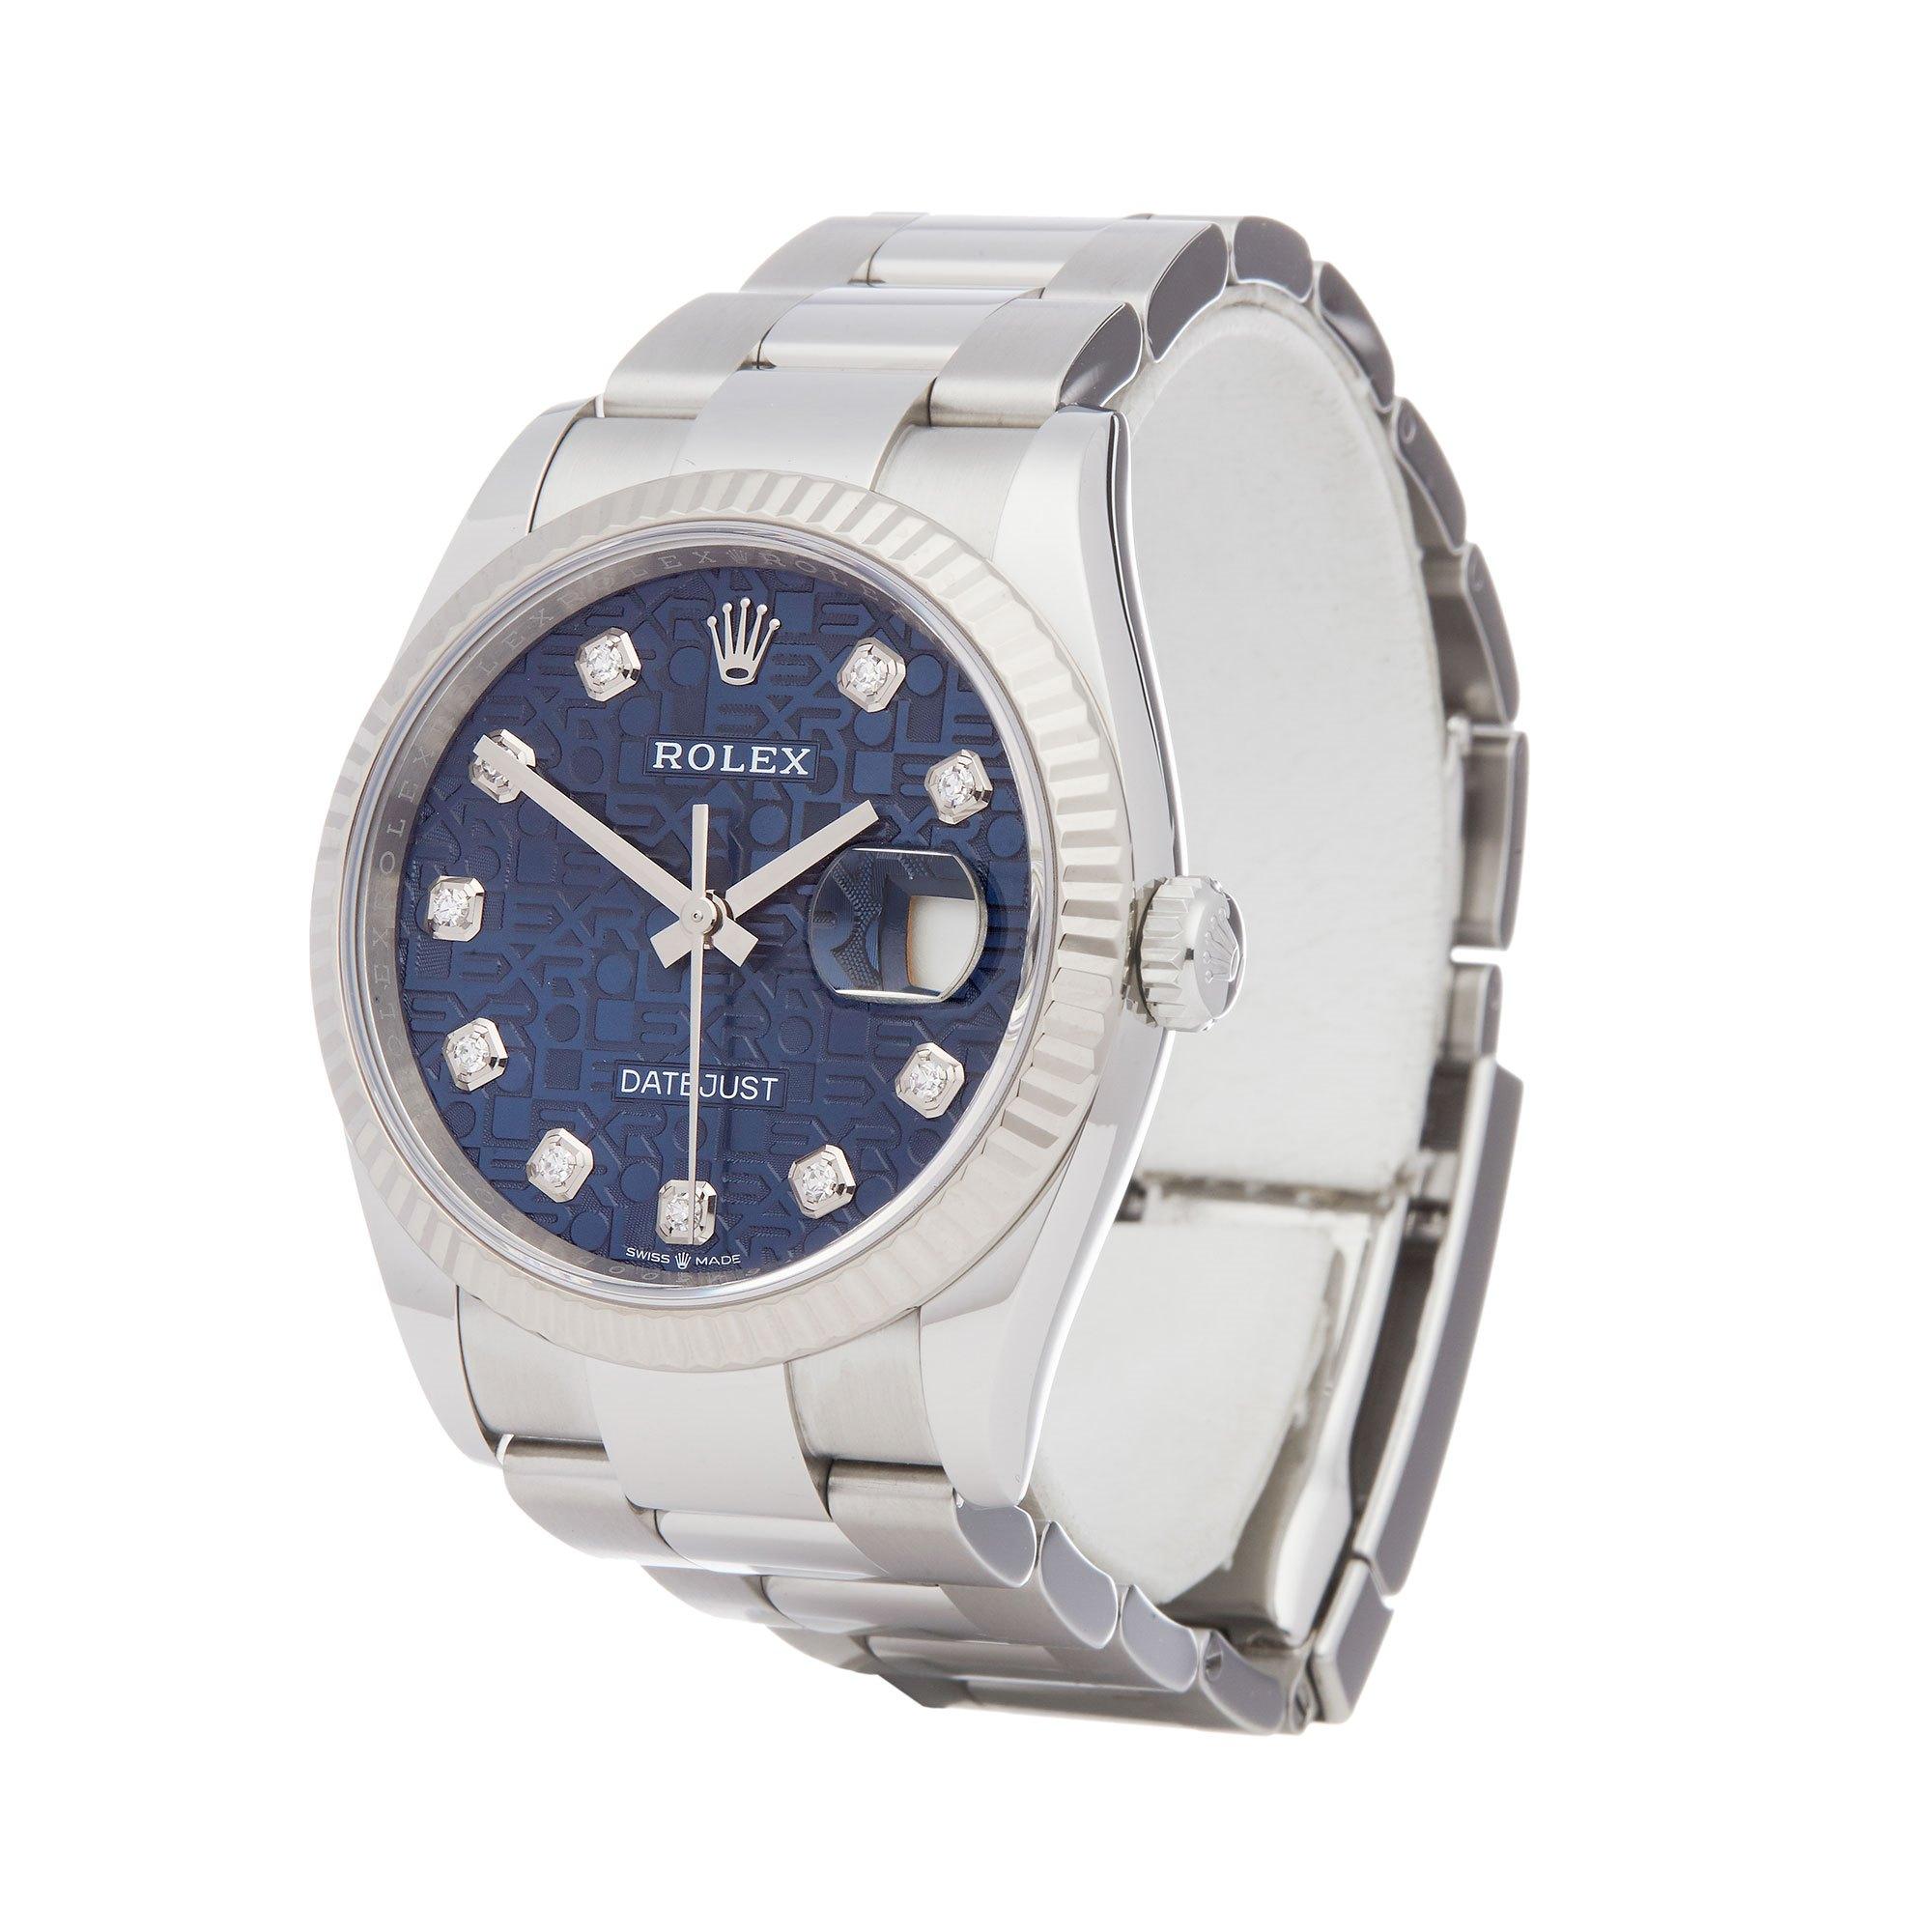 Xupes Reference: W007750
Manufacturer: Rolex
Model: Datejust
Model Variant: 36
Model Number: 126234
Age: 18-08-2019
Gender: Unisex
Complete With: Rolex Box, Manuals, Guarantee, Card Holder, Bezel Guard & Swing Tag
Dial: Blue Diamond 
Glass: Sapphire